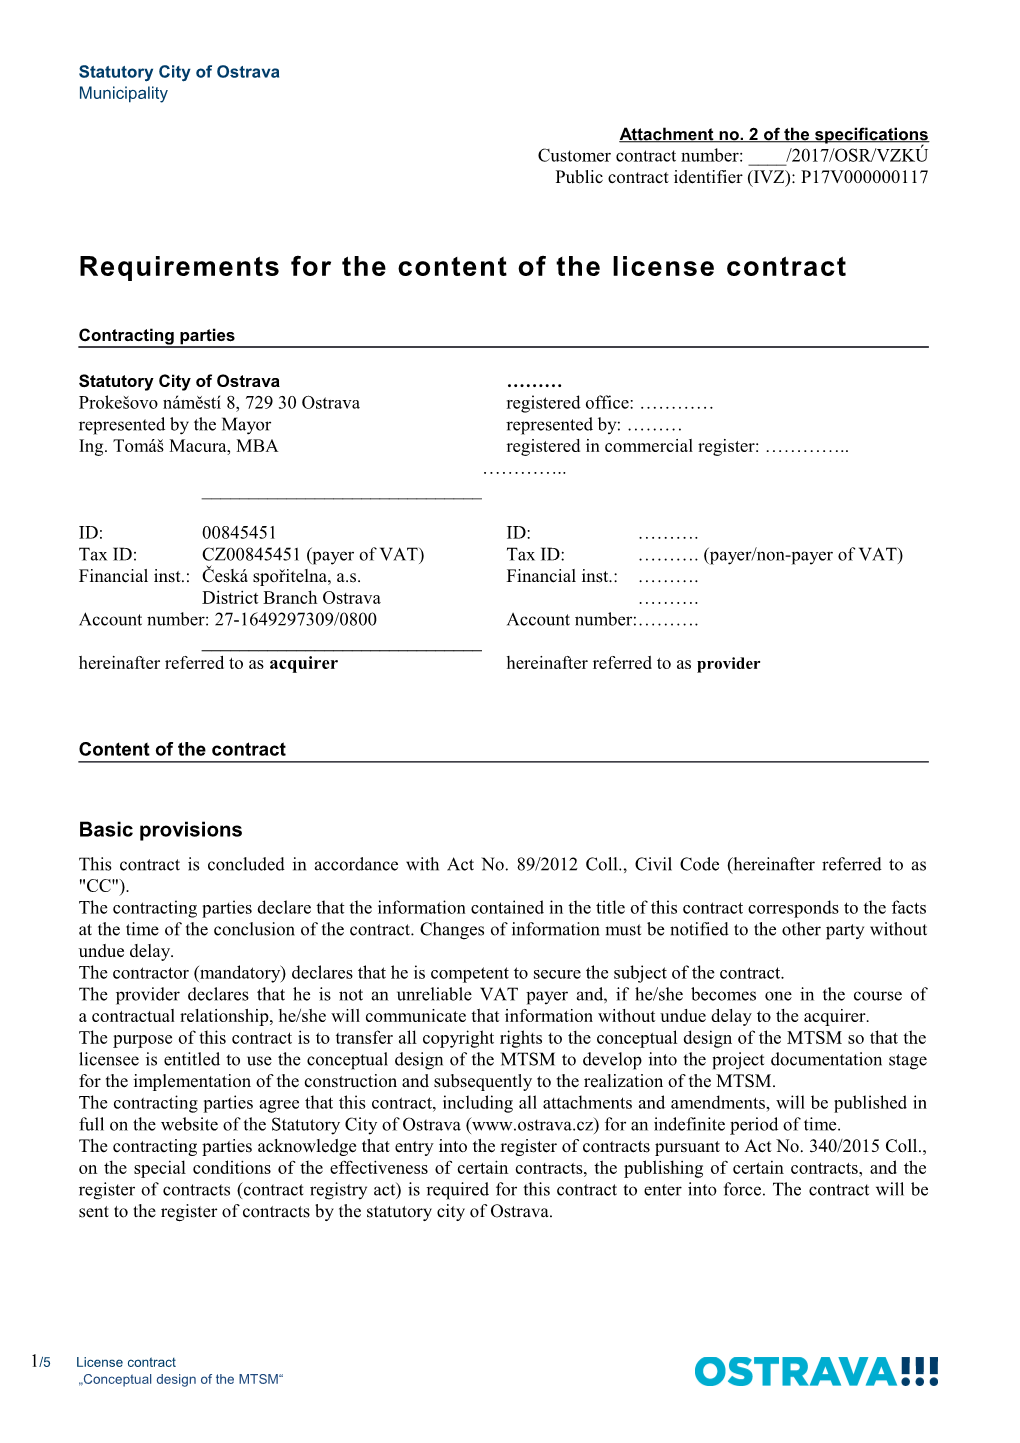 Requirements for the Content of the License Contract